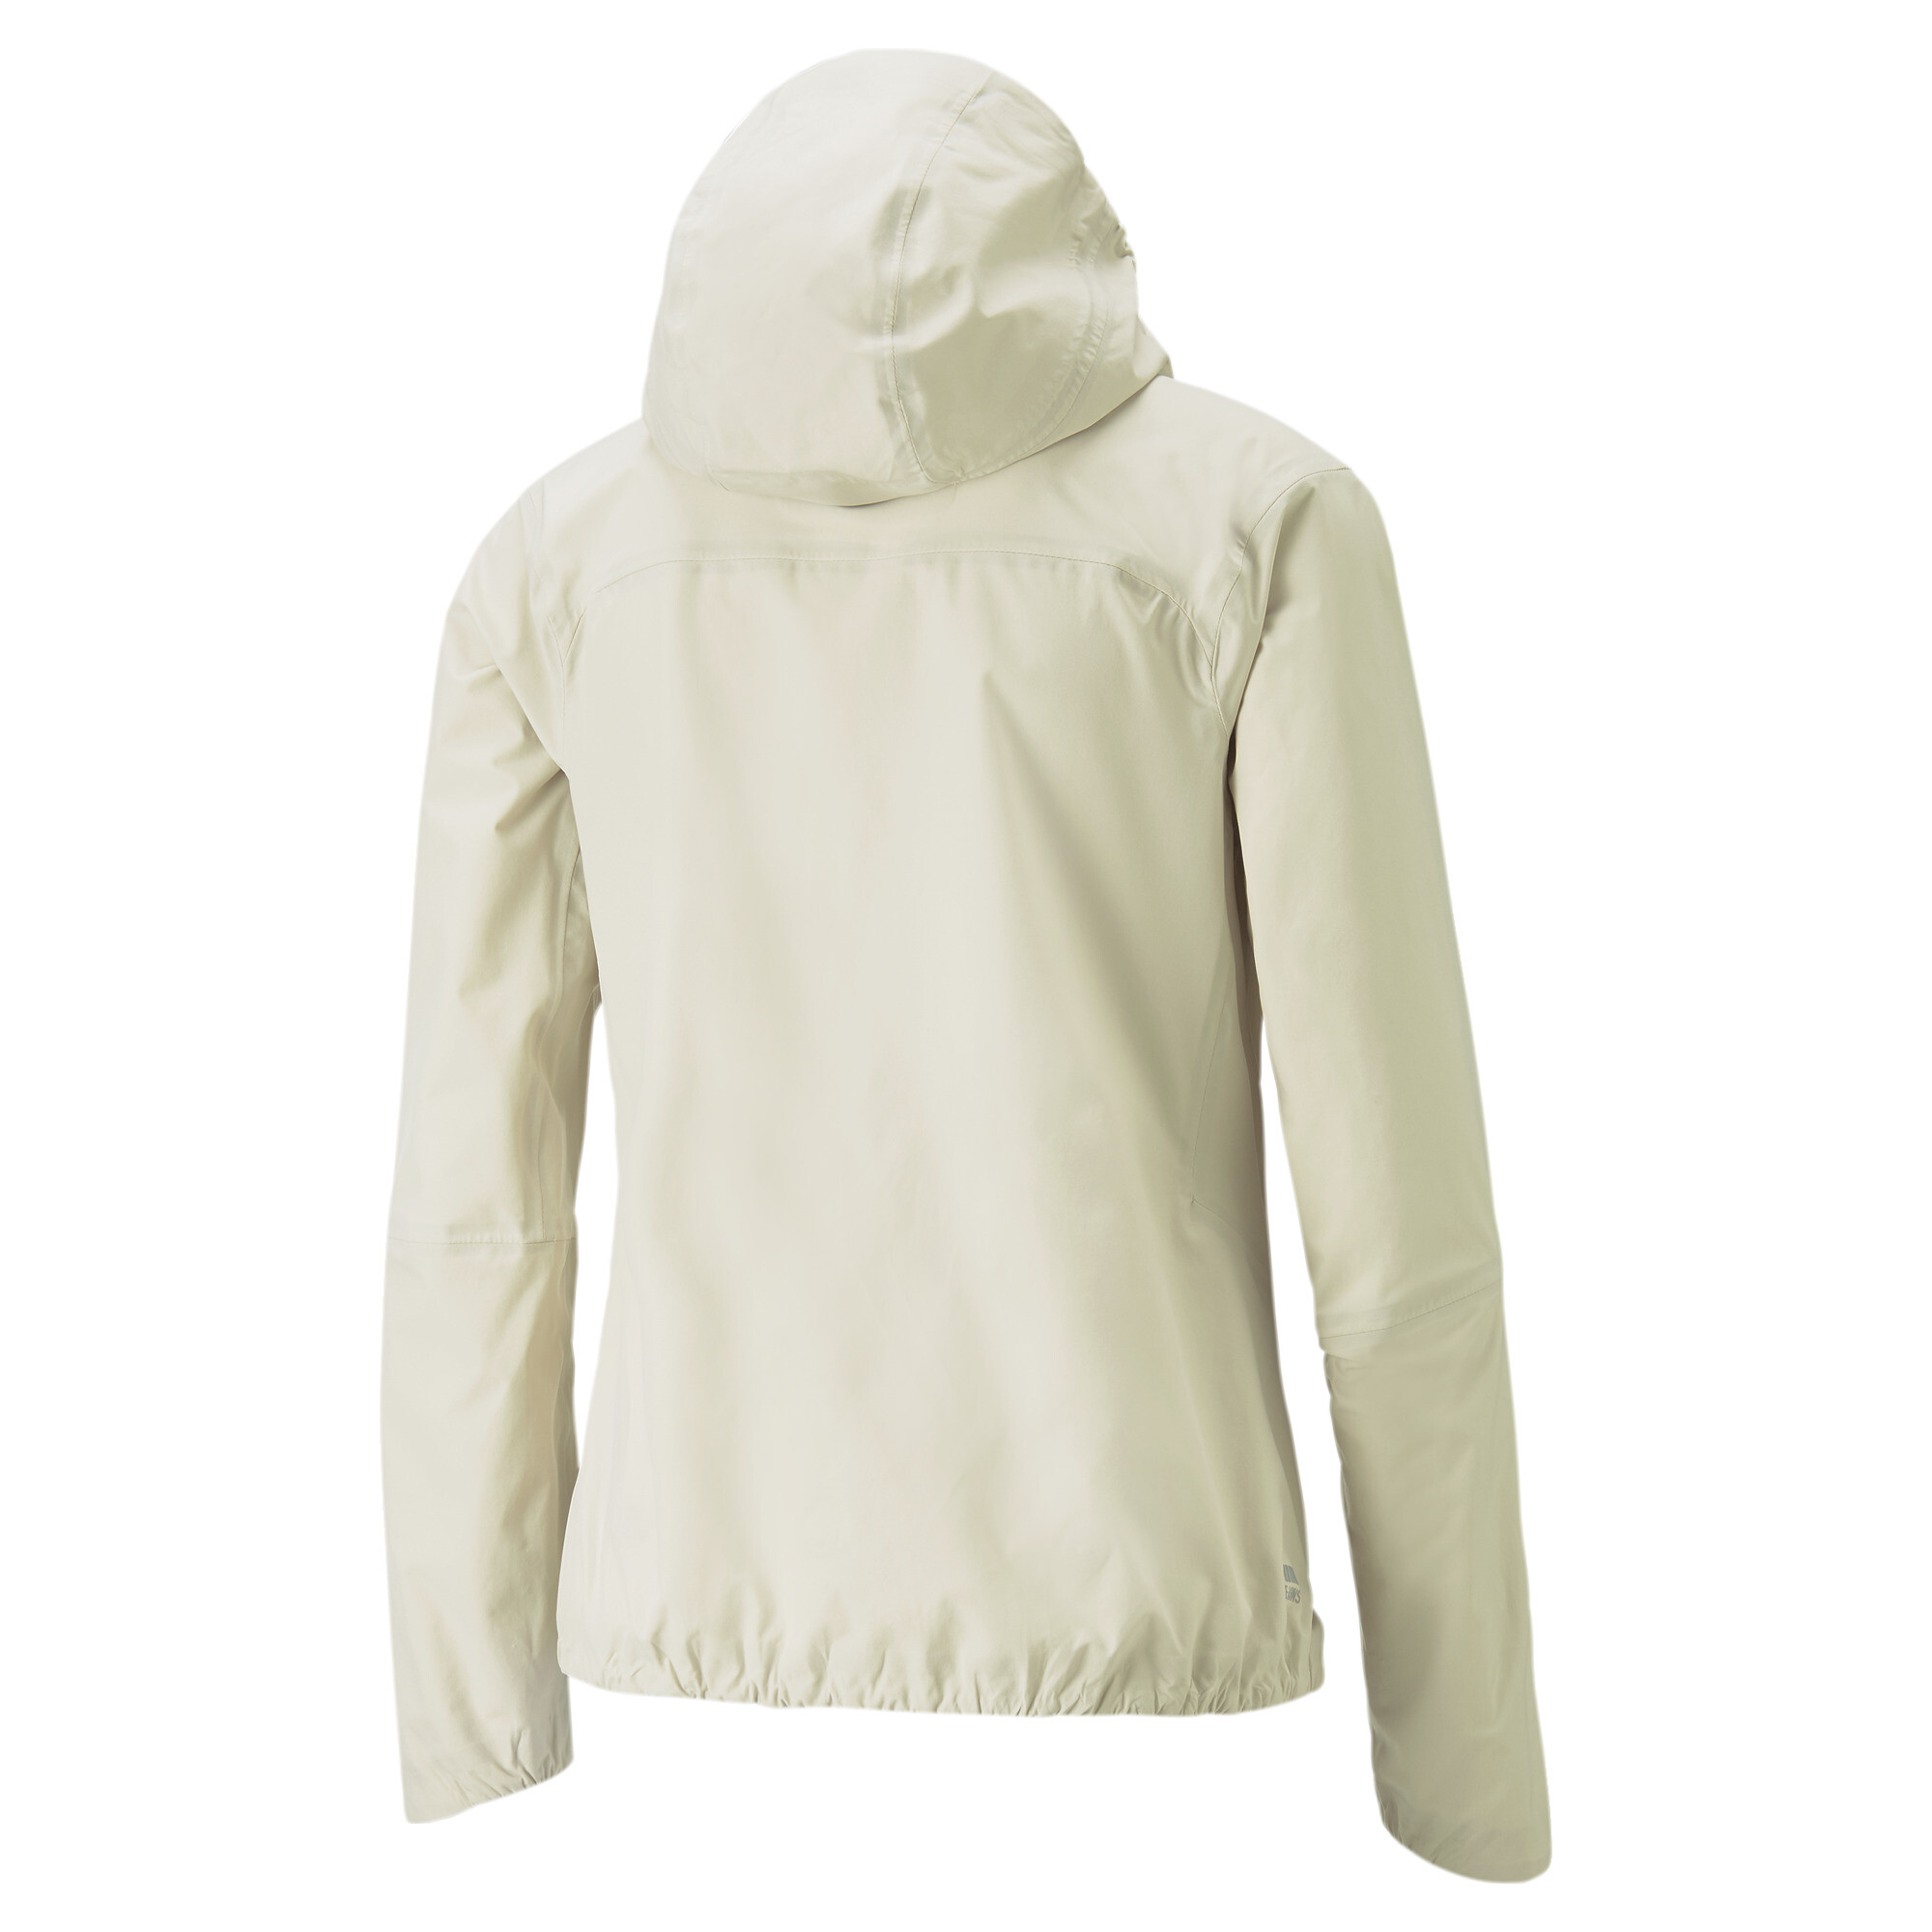 Women's Puma SEASONS Storm CELL Sympa TexÂ® Packable Trail Running Jacket, Beige, Size XS, Clothing